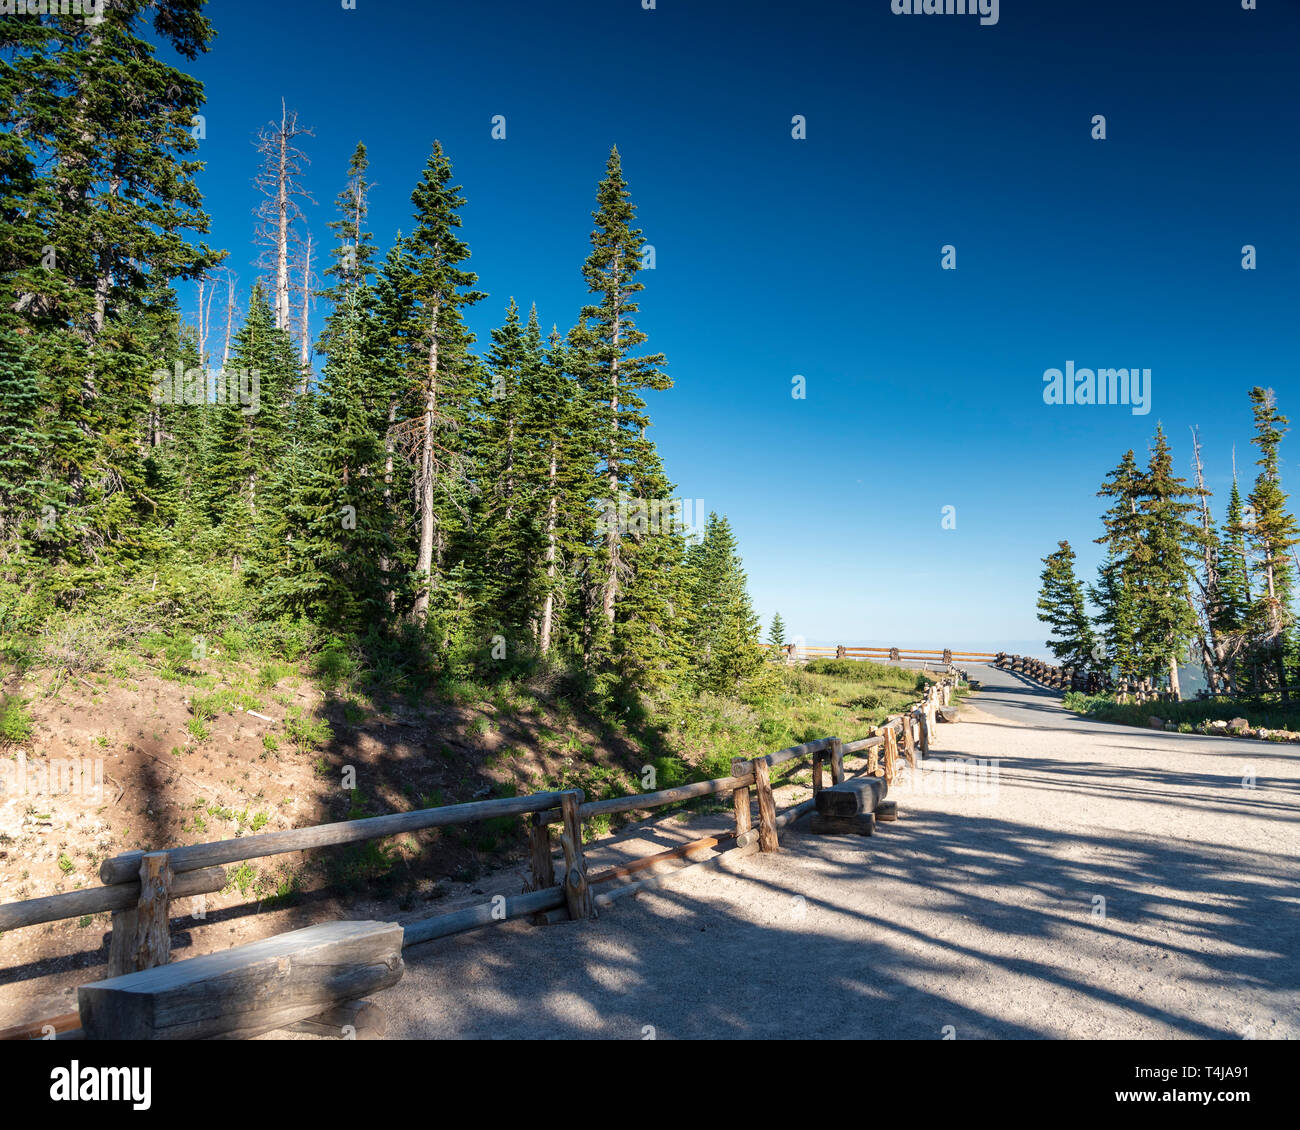 Gravel path with log fence and forest on both sides leads to view point beyond under a blue sky. Stock Photo